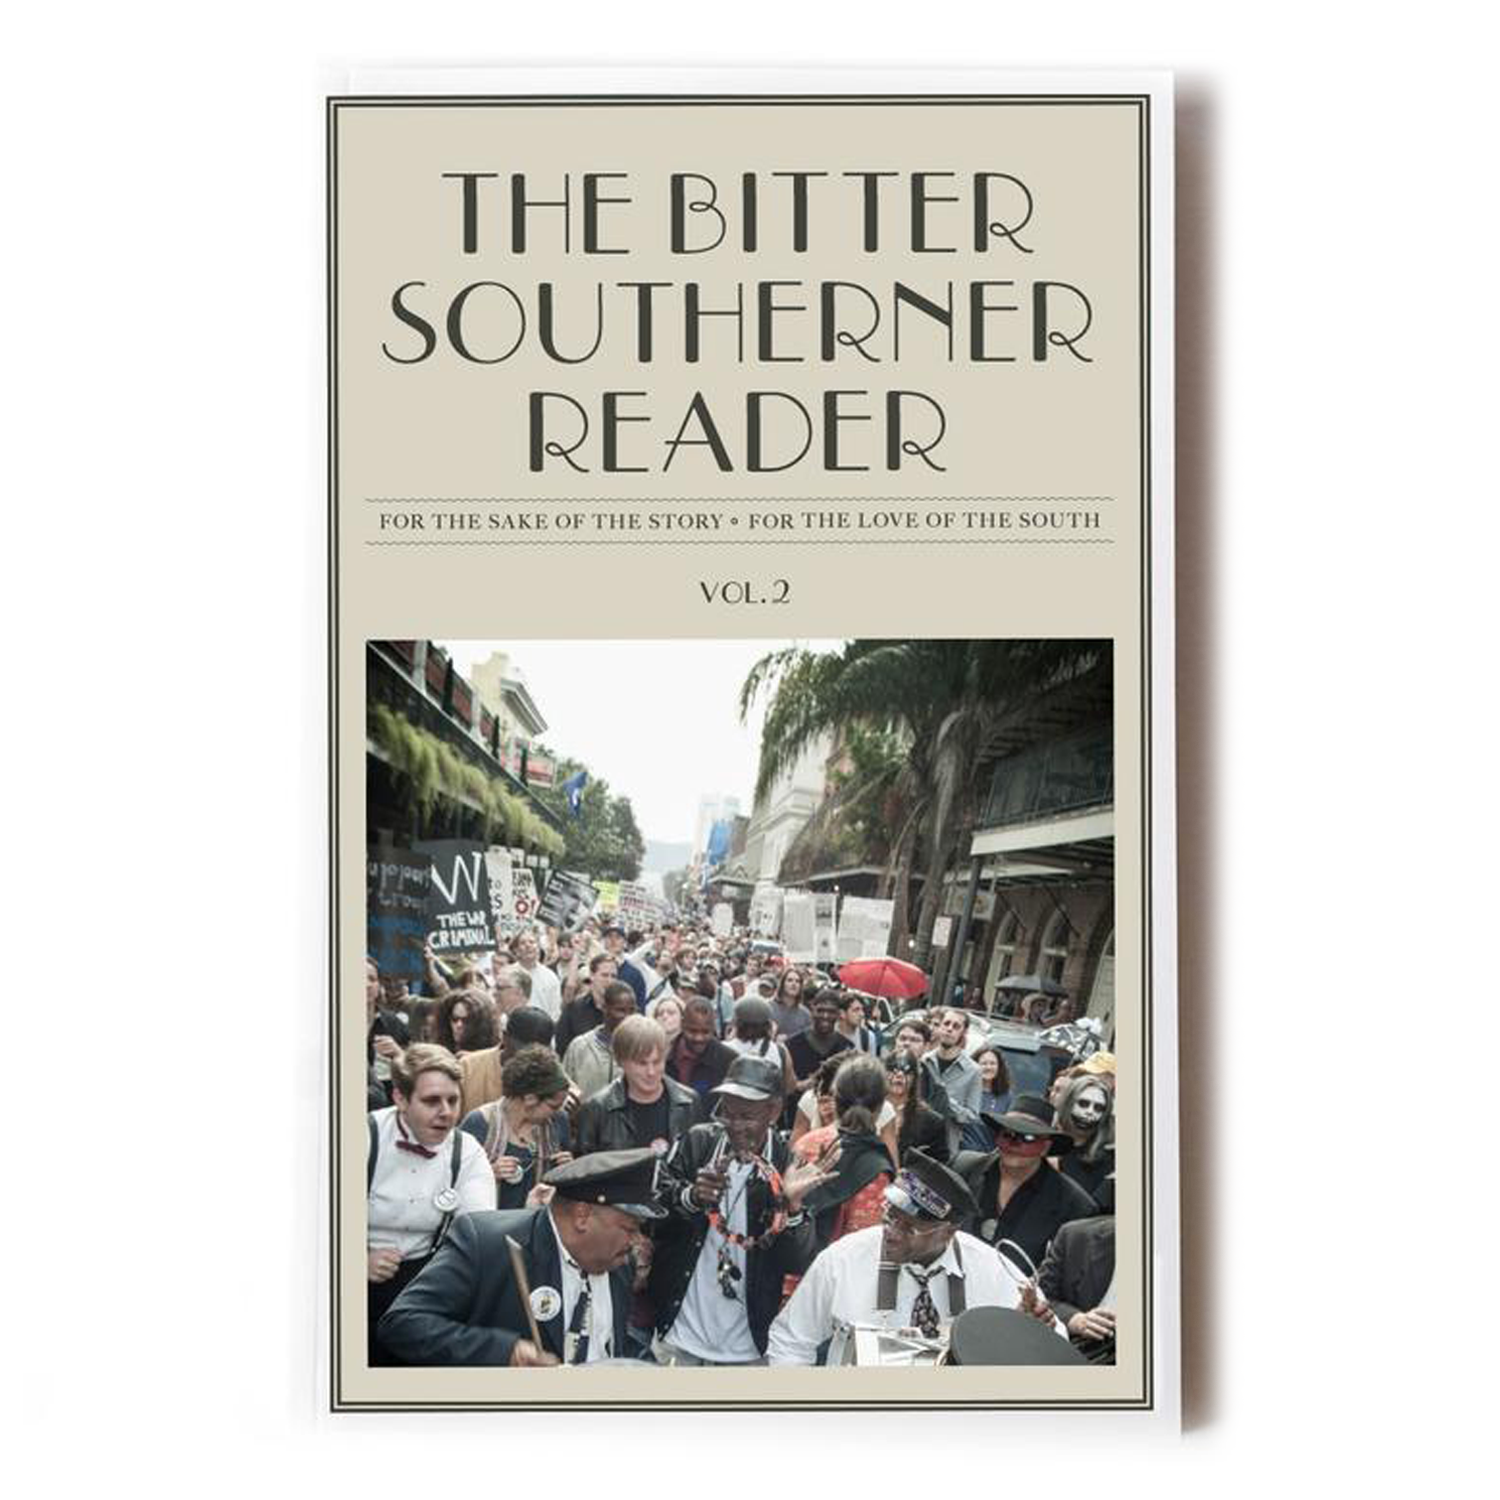 The Down and Dirty, from The Bitter Southerner — THE BITTER SOUTHERNER